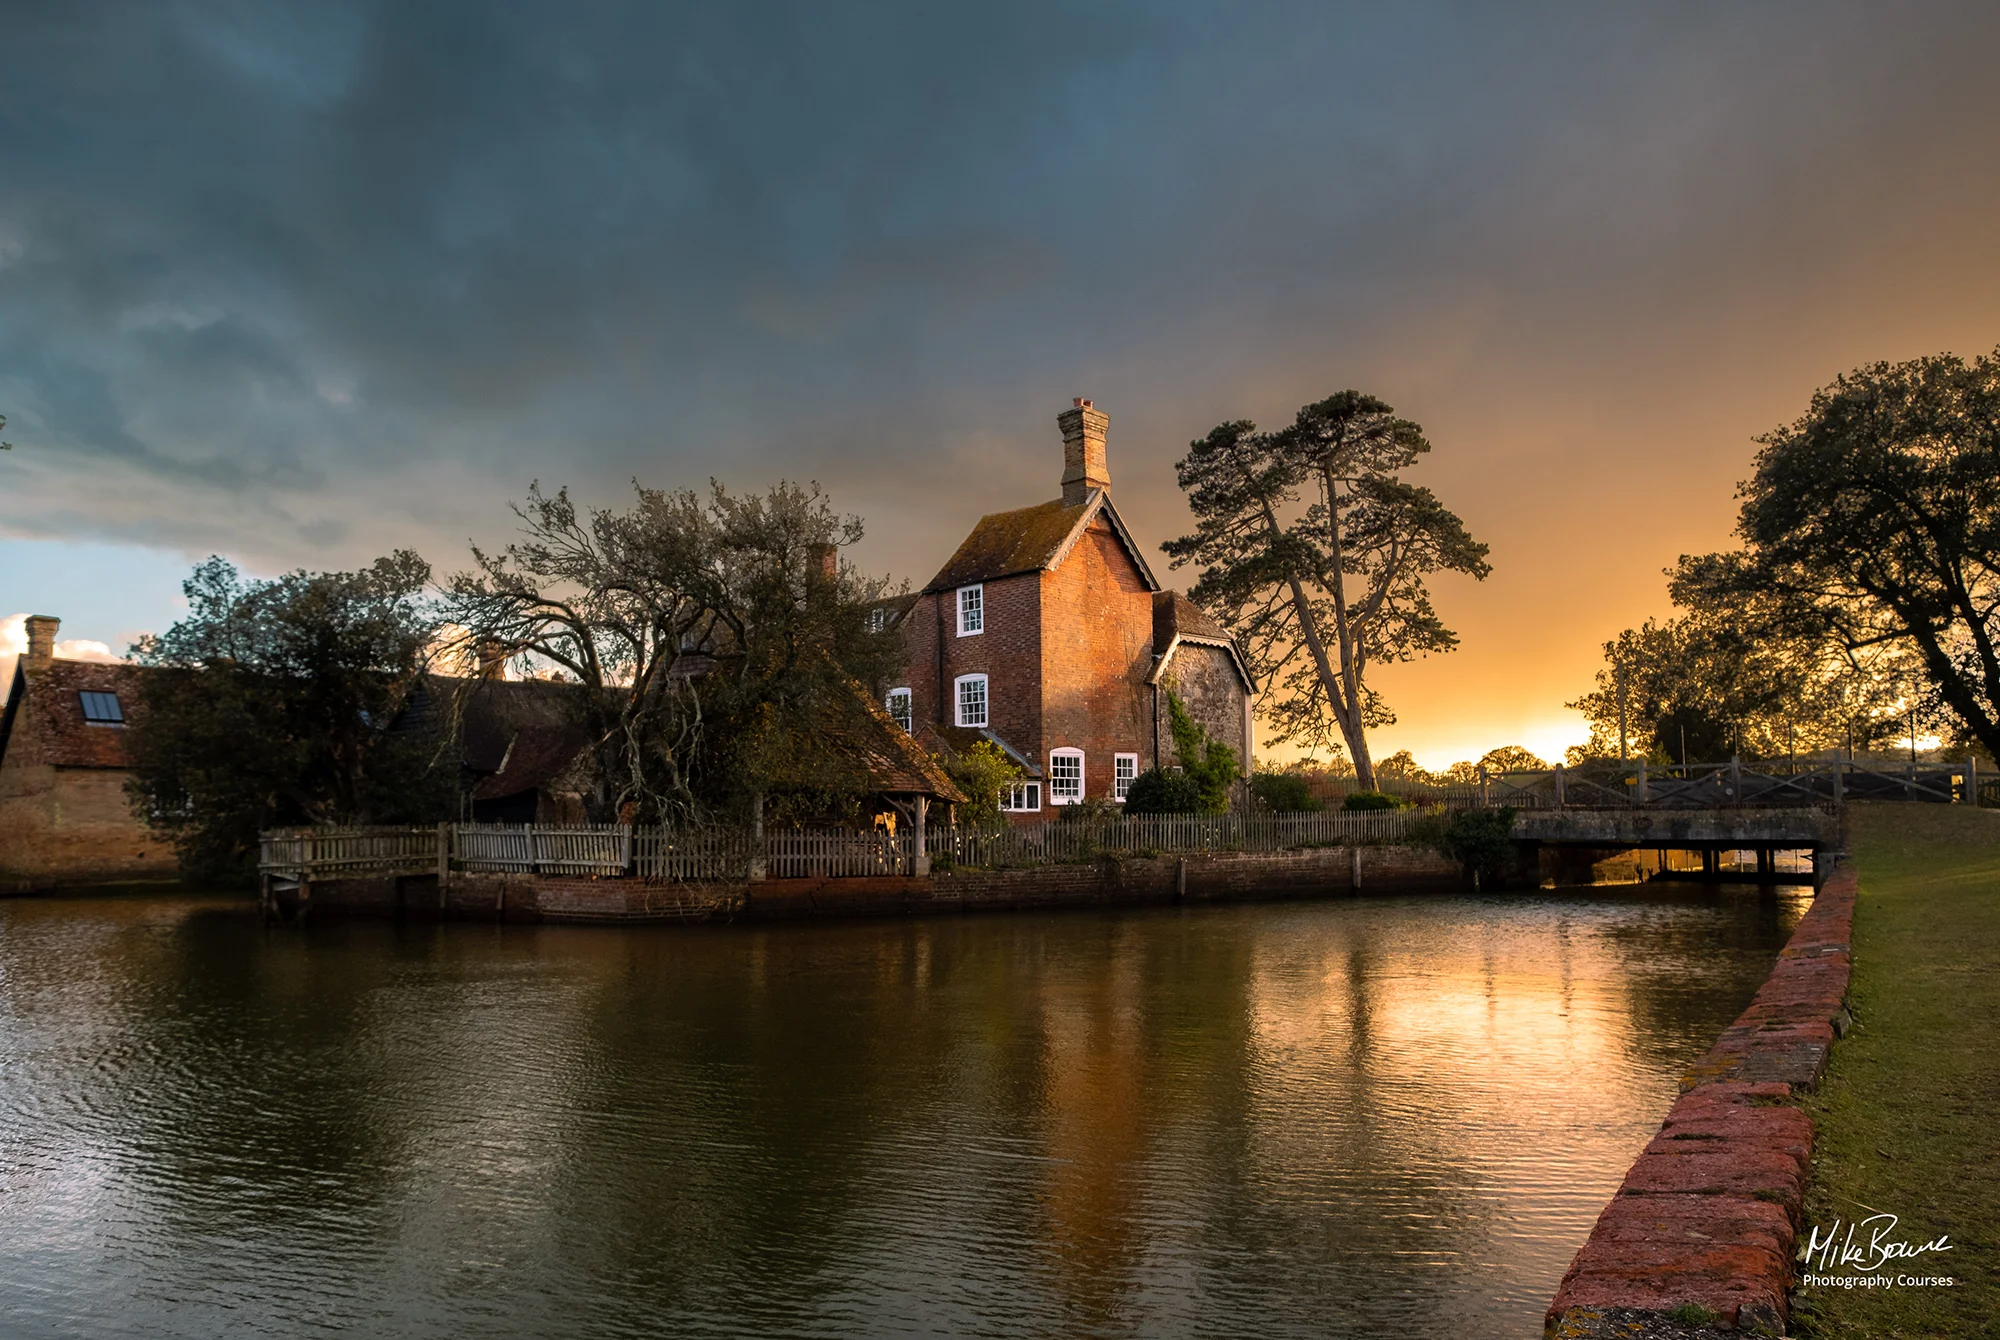 Tall red brick house and trees by a river at sunset